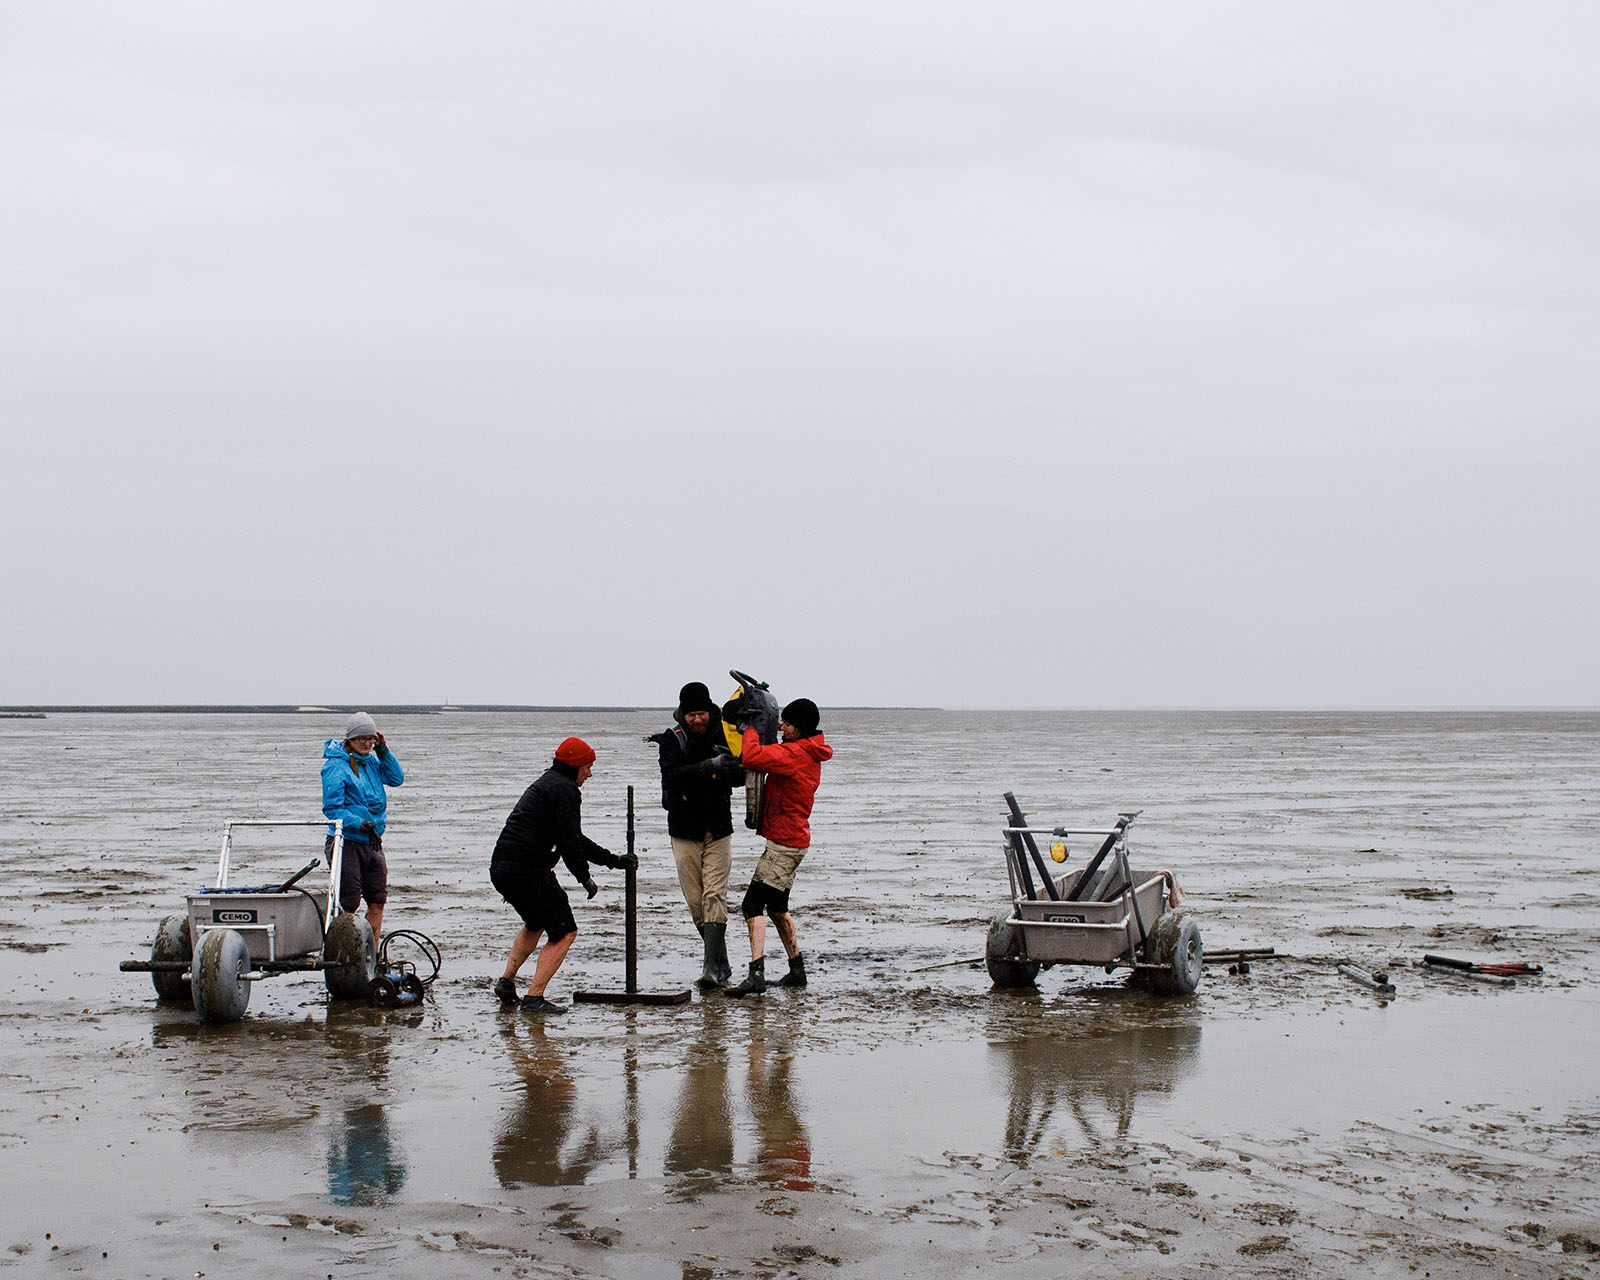 Sediment cores are taken to record settlement remains and reconstruct landscape development at selected sites on the tidal flats in northern Germany. Photo © Justus Lemm, Berlin